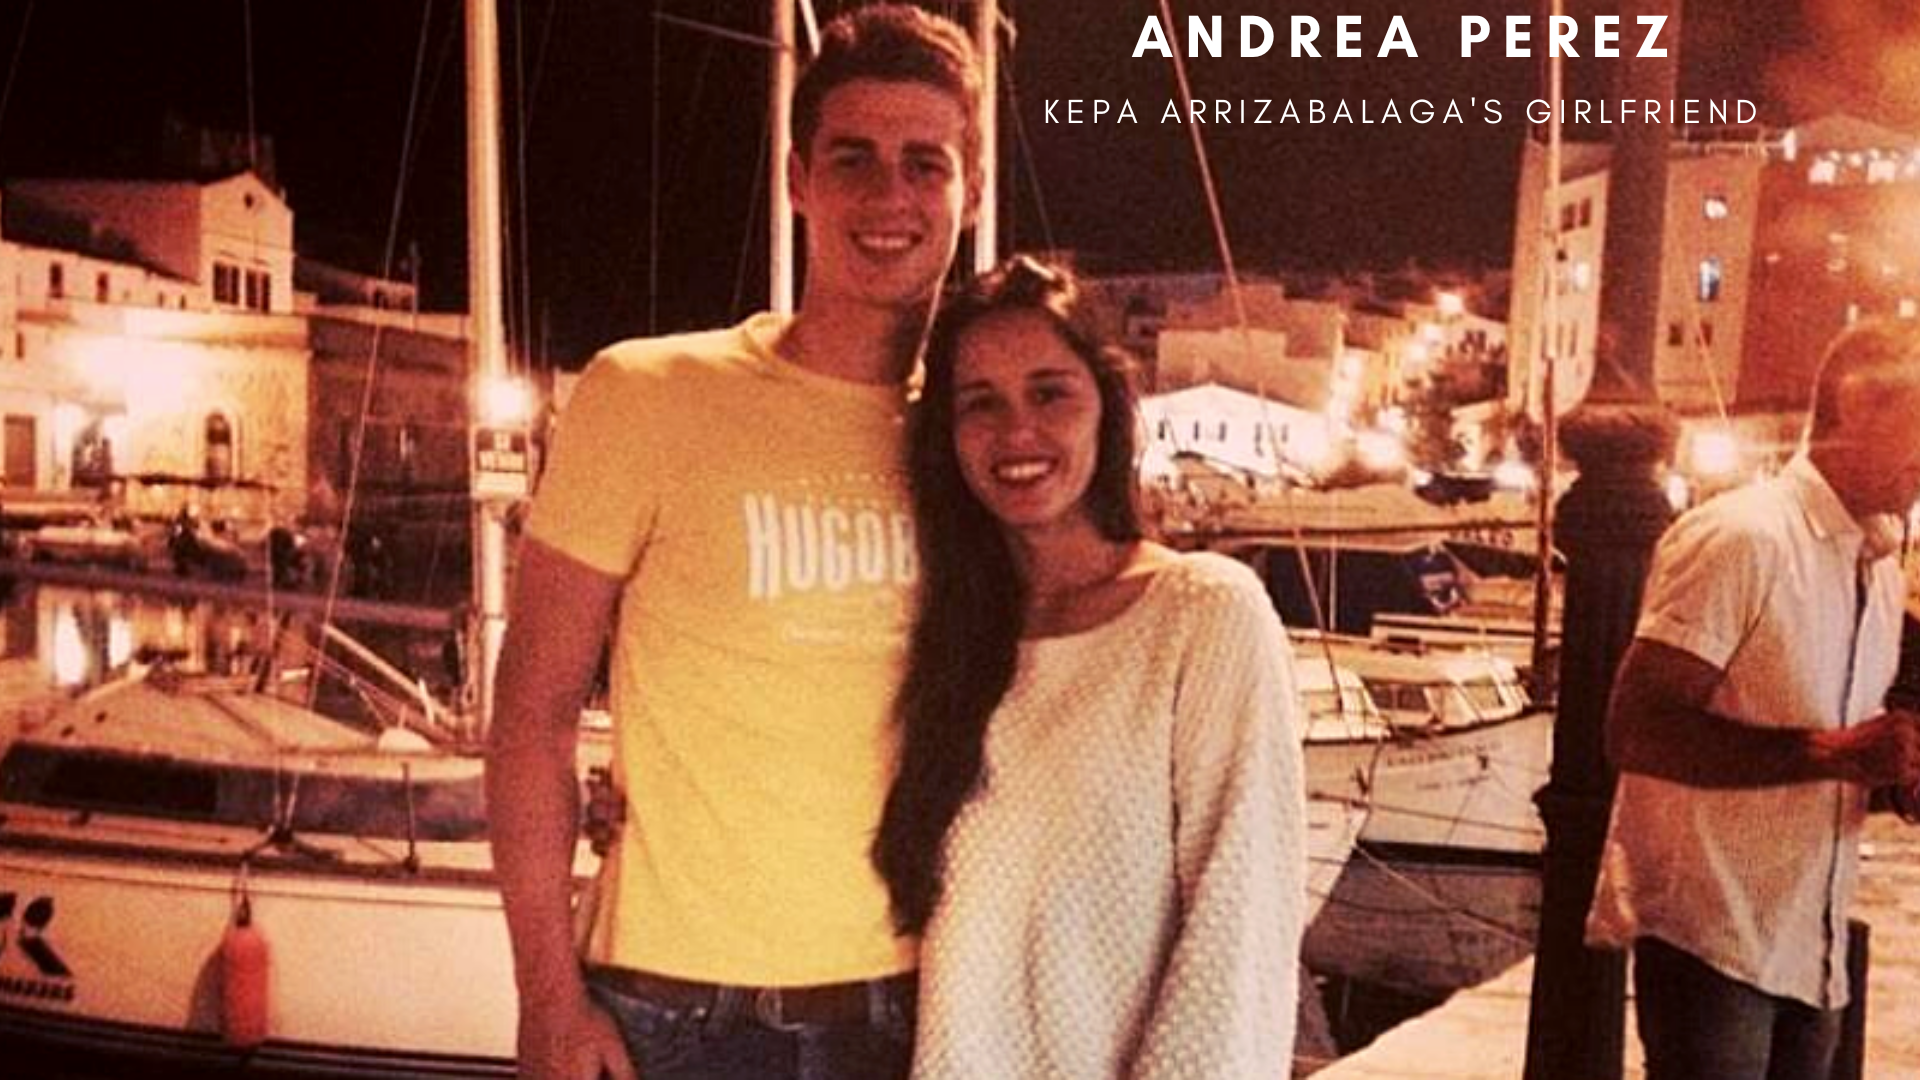 Kepa Arrizabalaga with girlfriend Andrea Perez. (Picture was taken from thesportsrush.com)